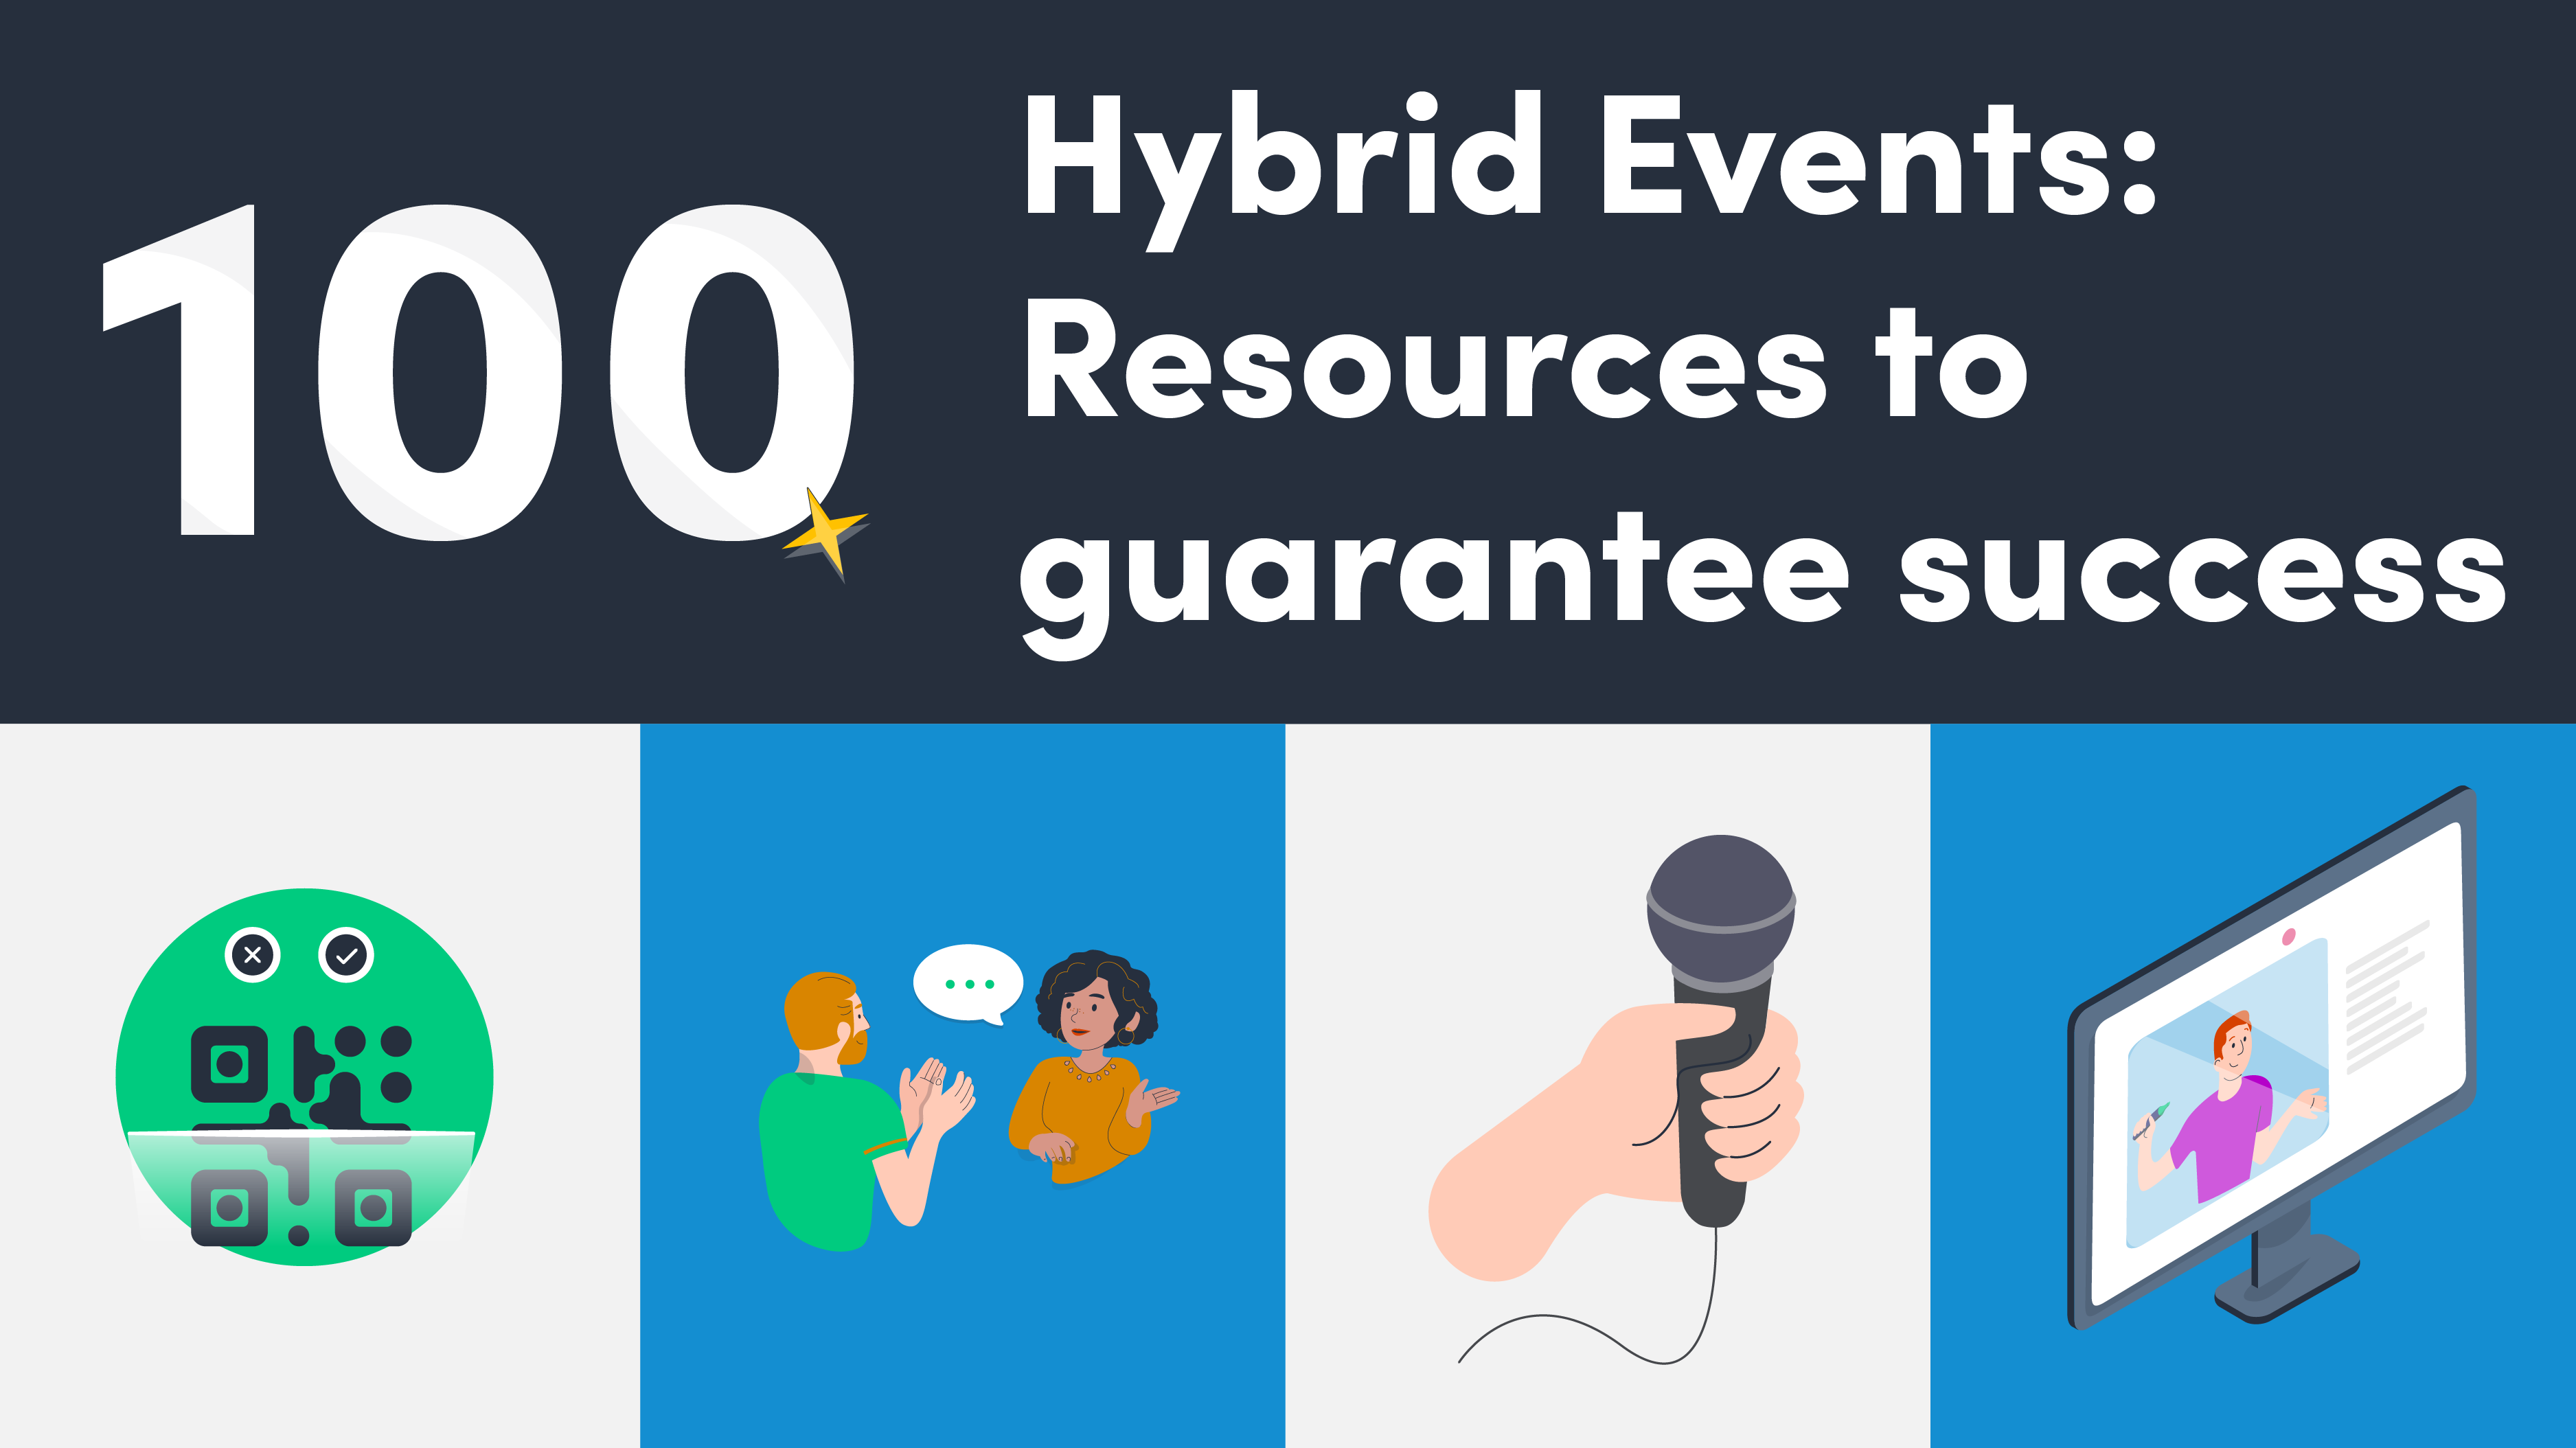 Hybrid Events: 100 Free Resources to Guarantee Success